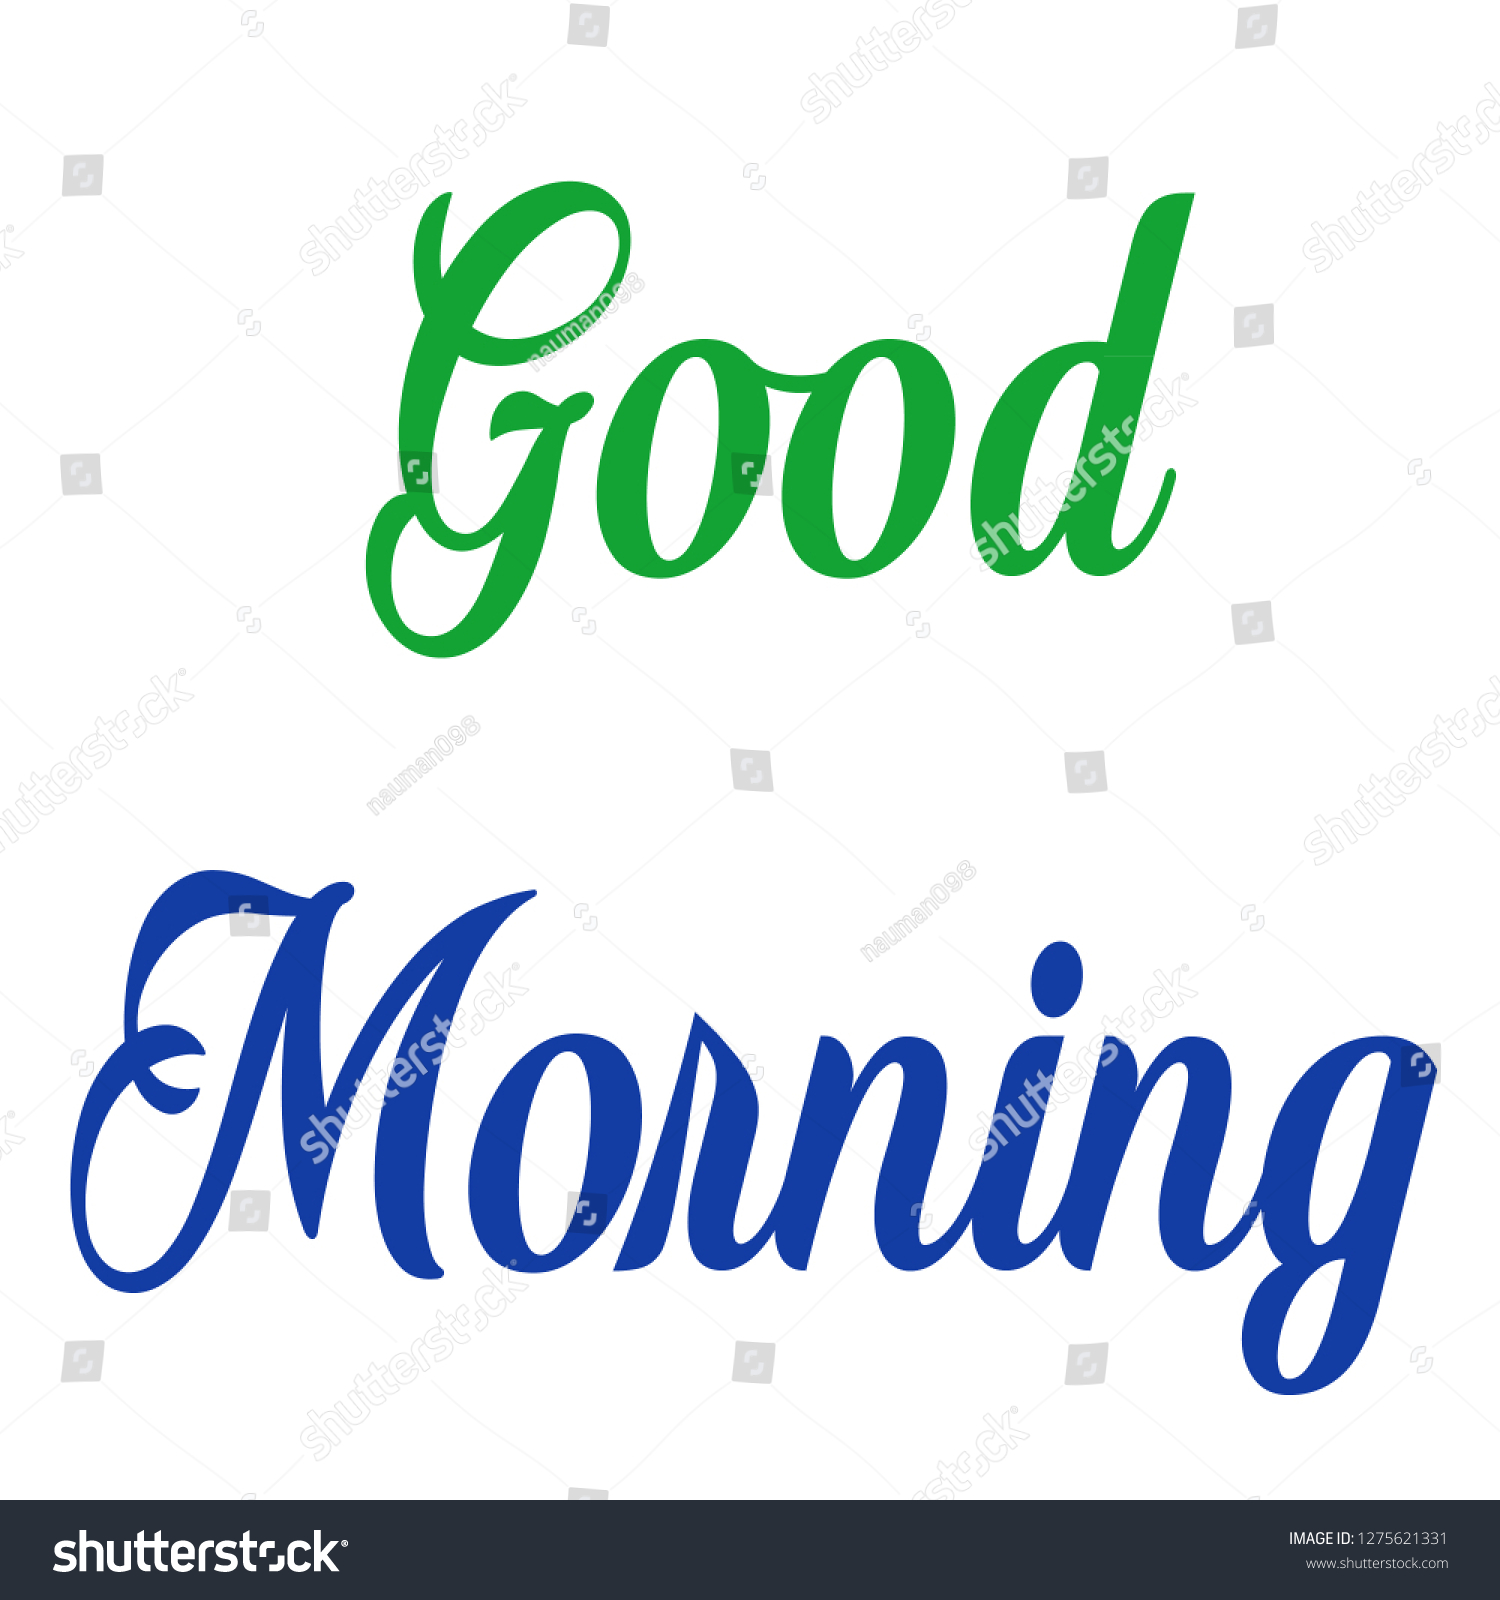 Good Morning Greetings Colours Styles Stock Illustration 1275621331 ...